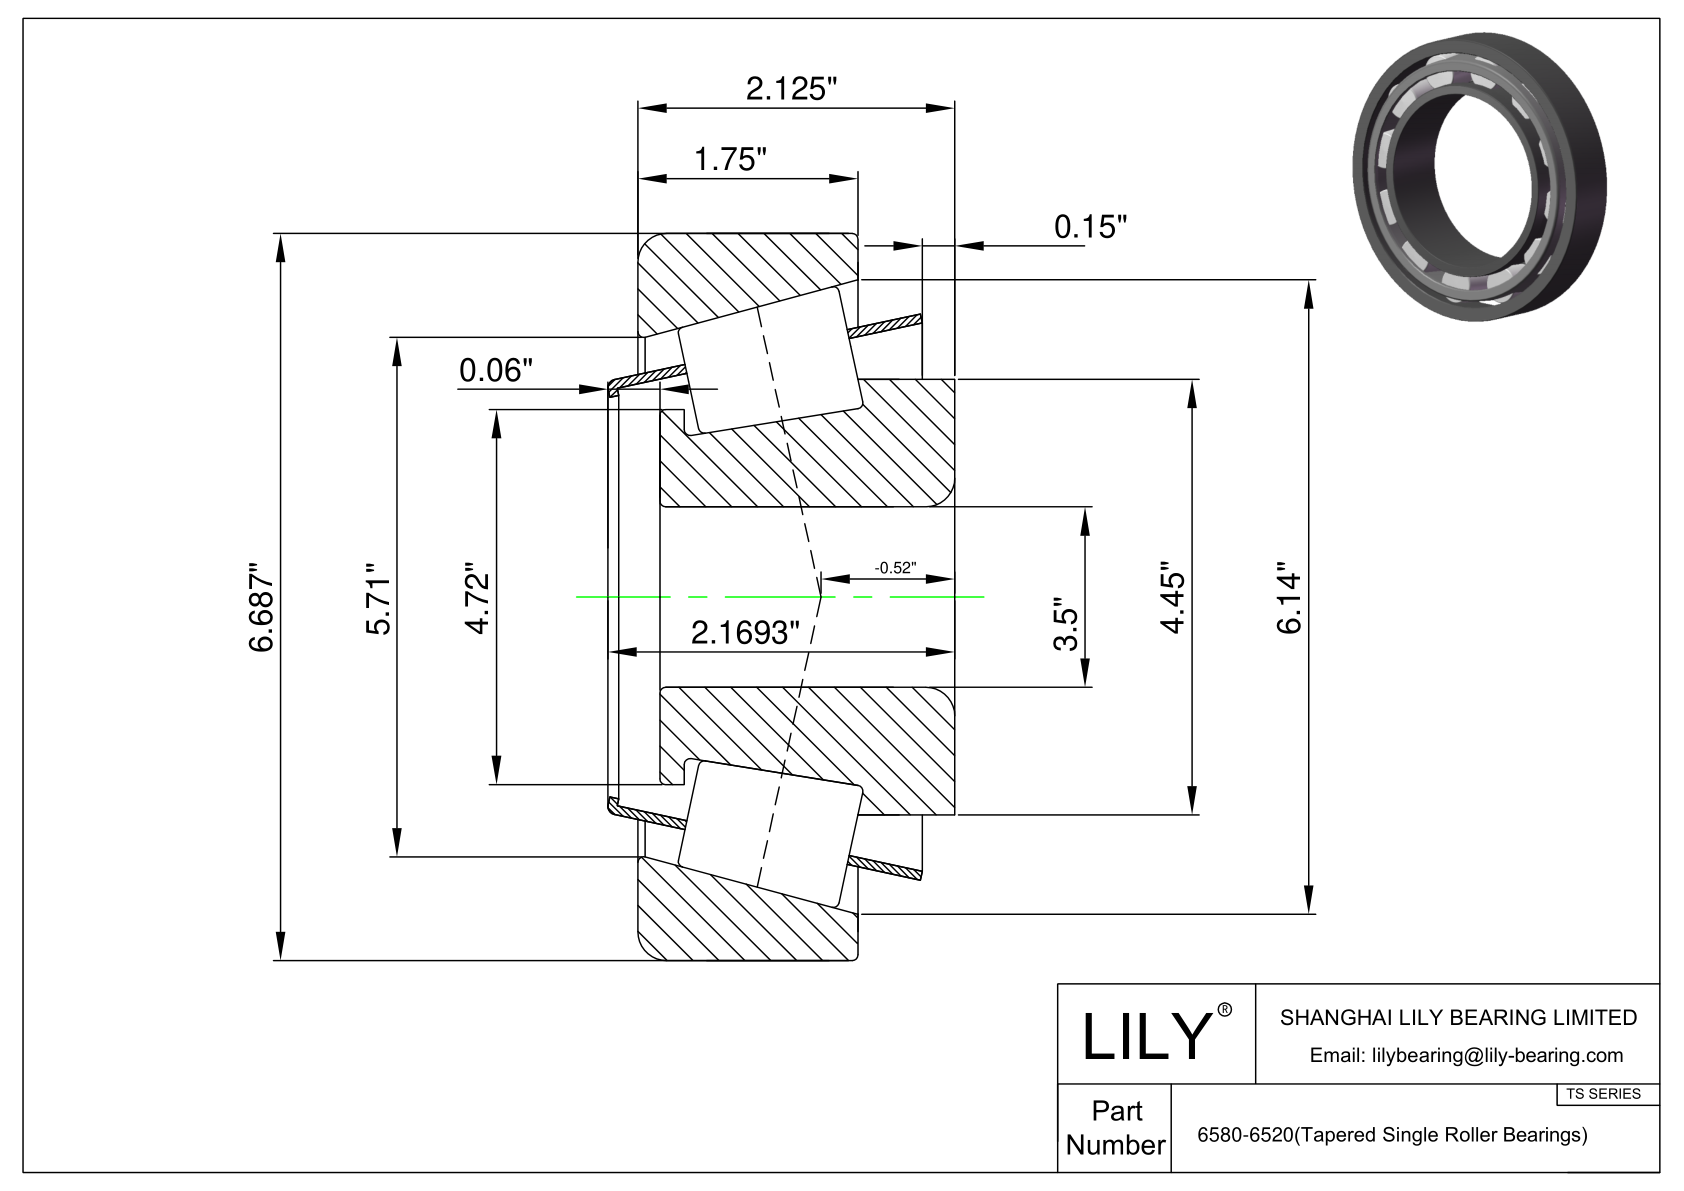 6580-6520 TS (Tapered Single Roller Bearings) (Imperial) cad drawing